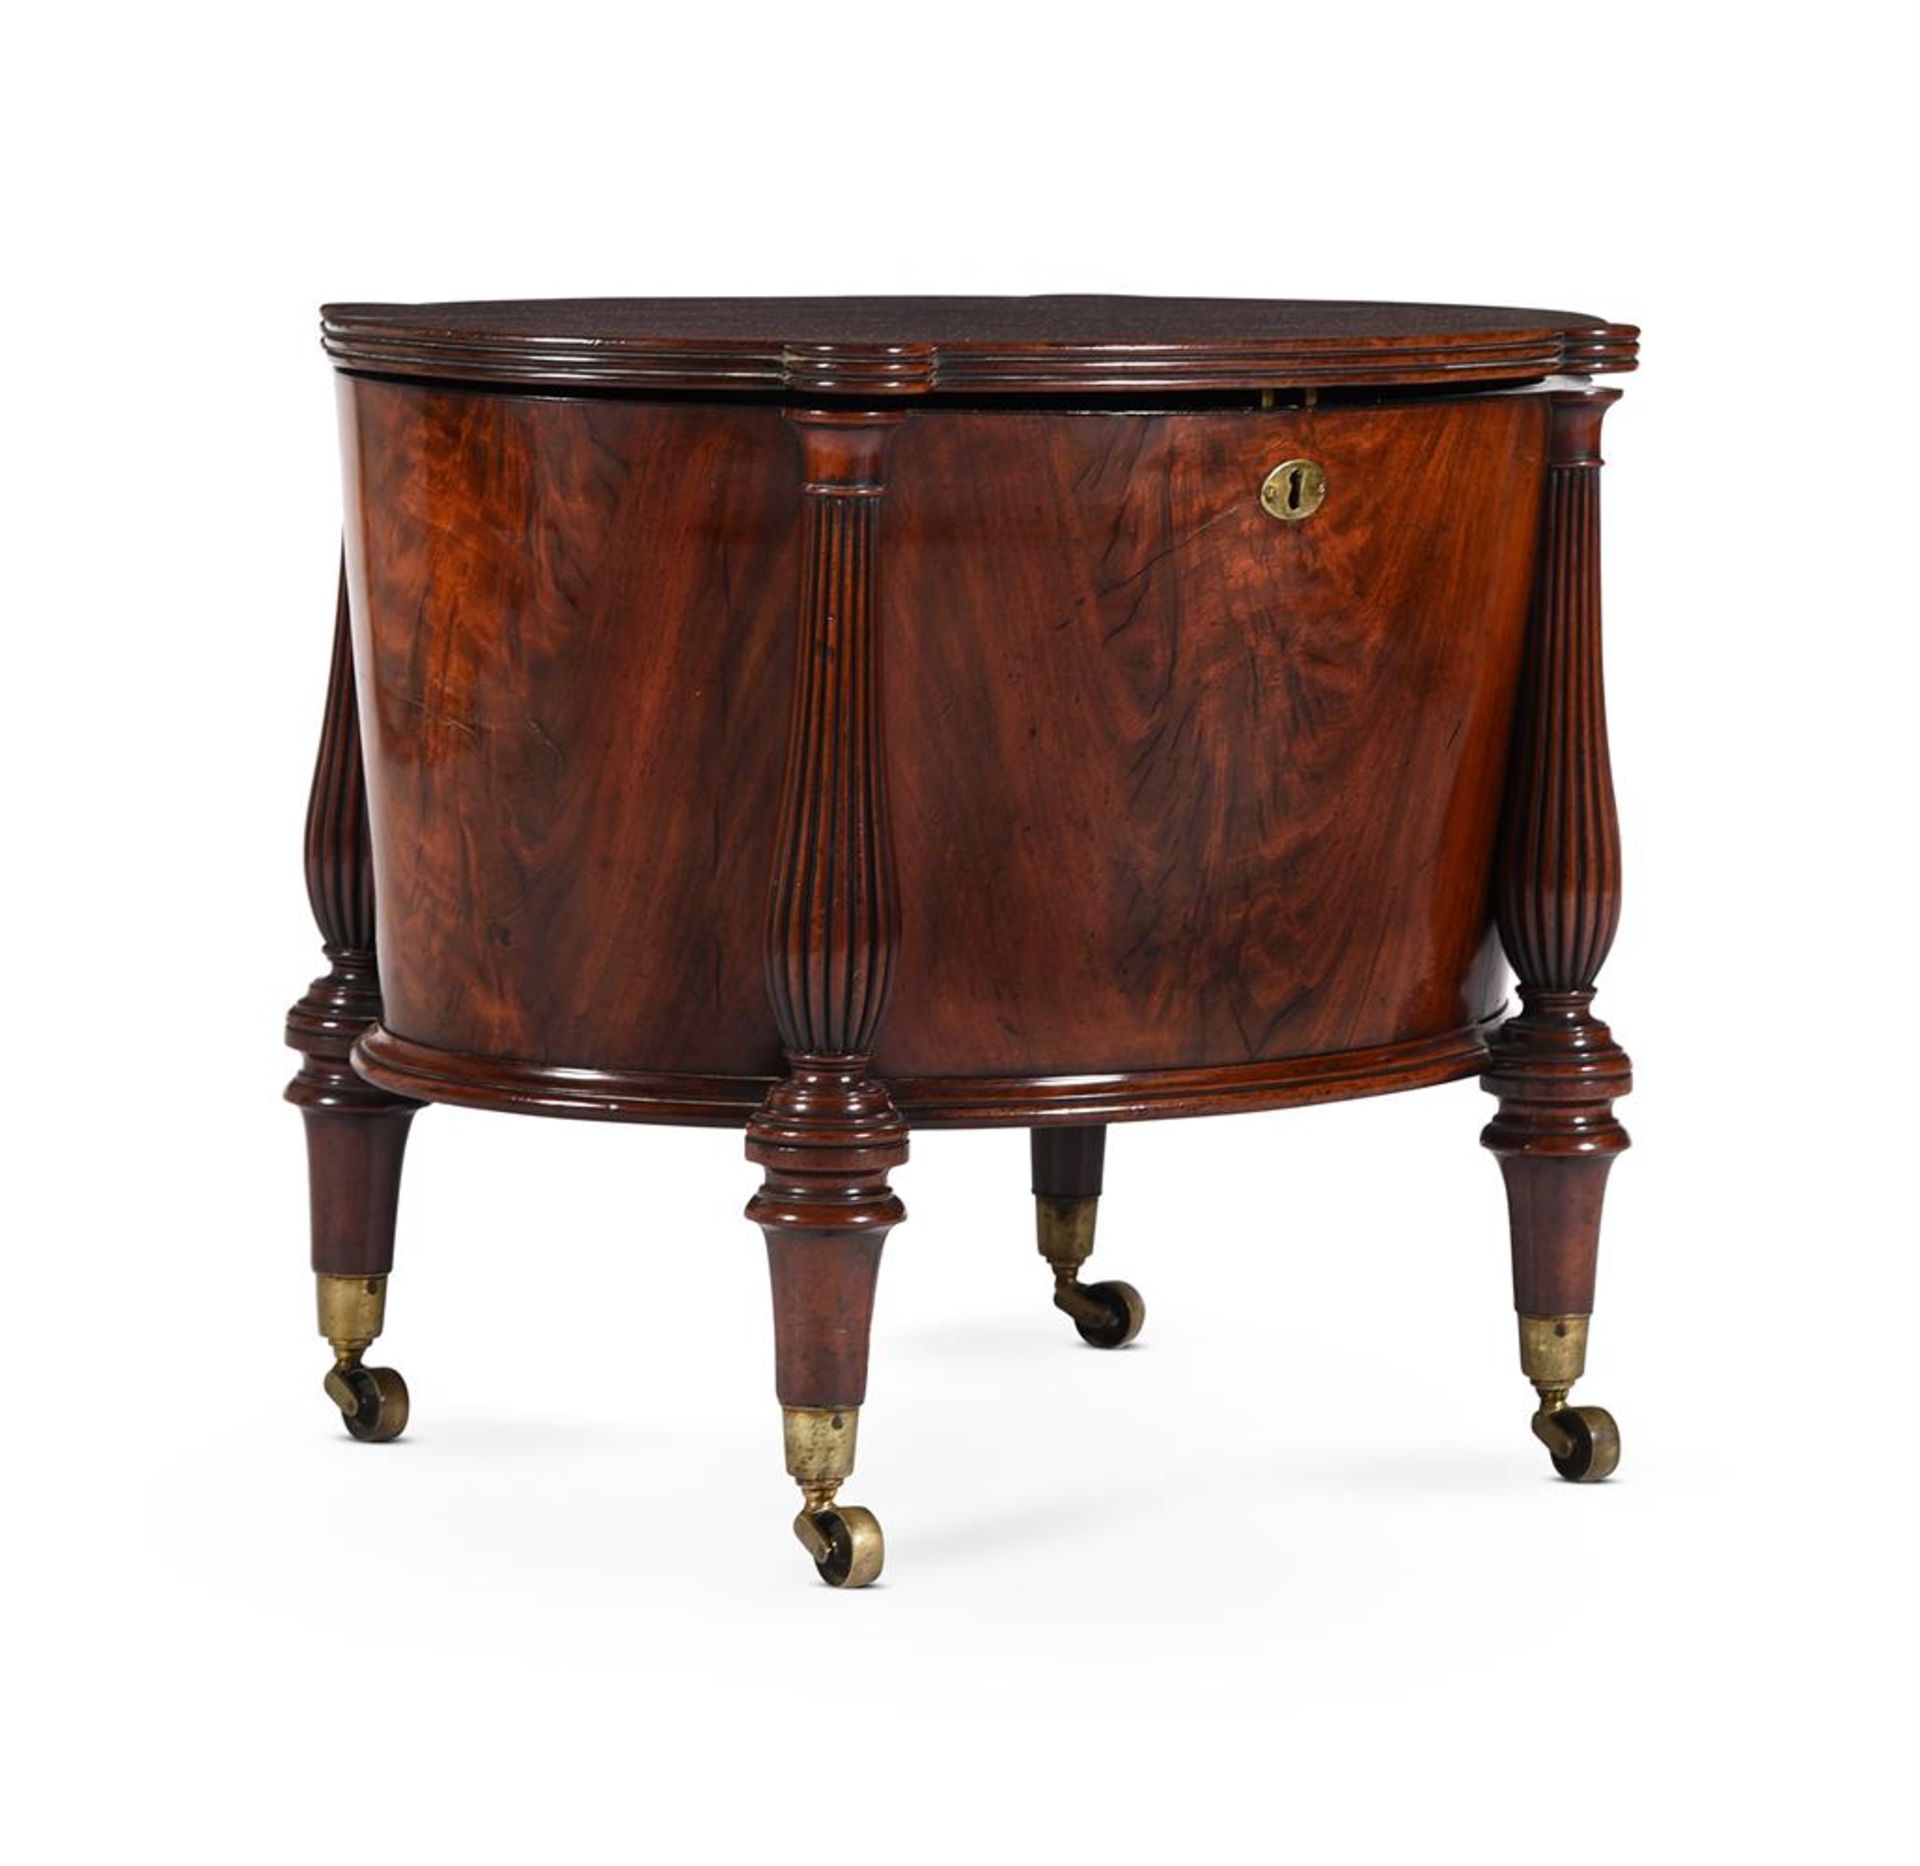 A REGENCY MAHOGANY OVAL WINE COOLER, ATTRIBUTED TO GILLOWS, CIRCA 1810 - Image 2 of 6